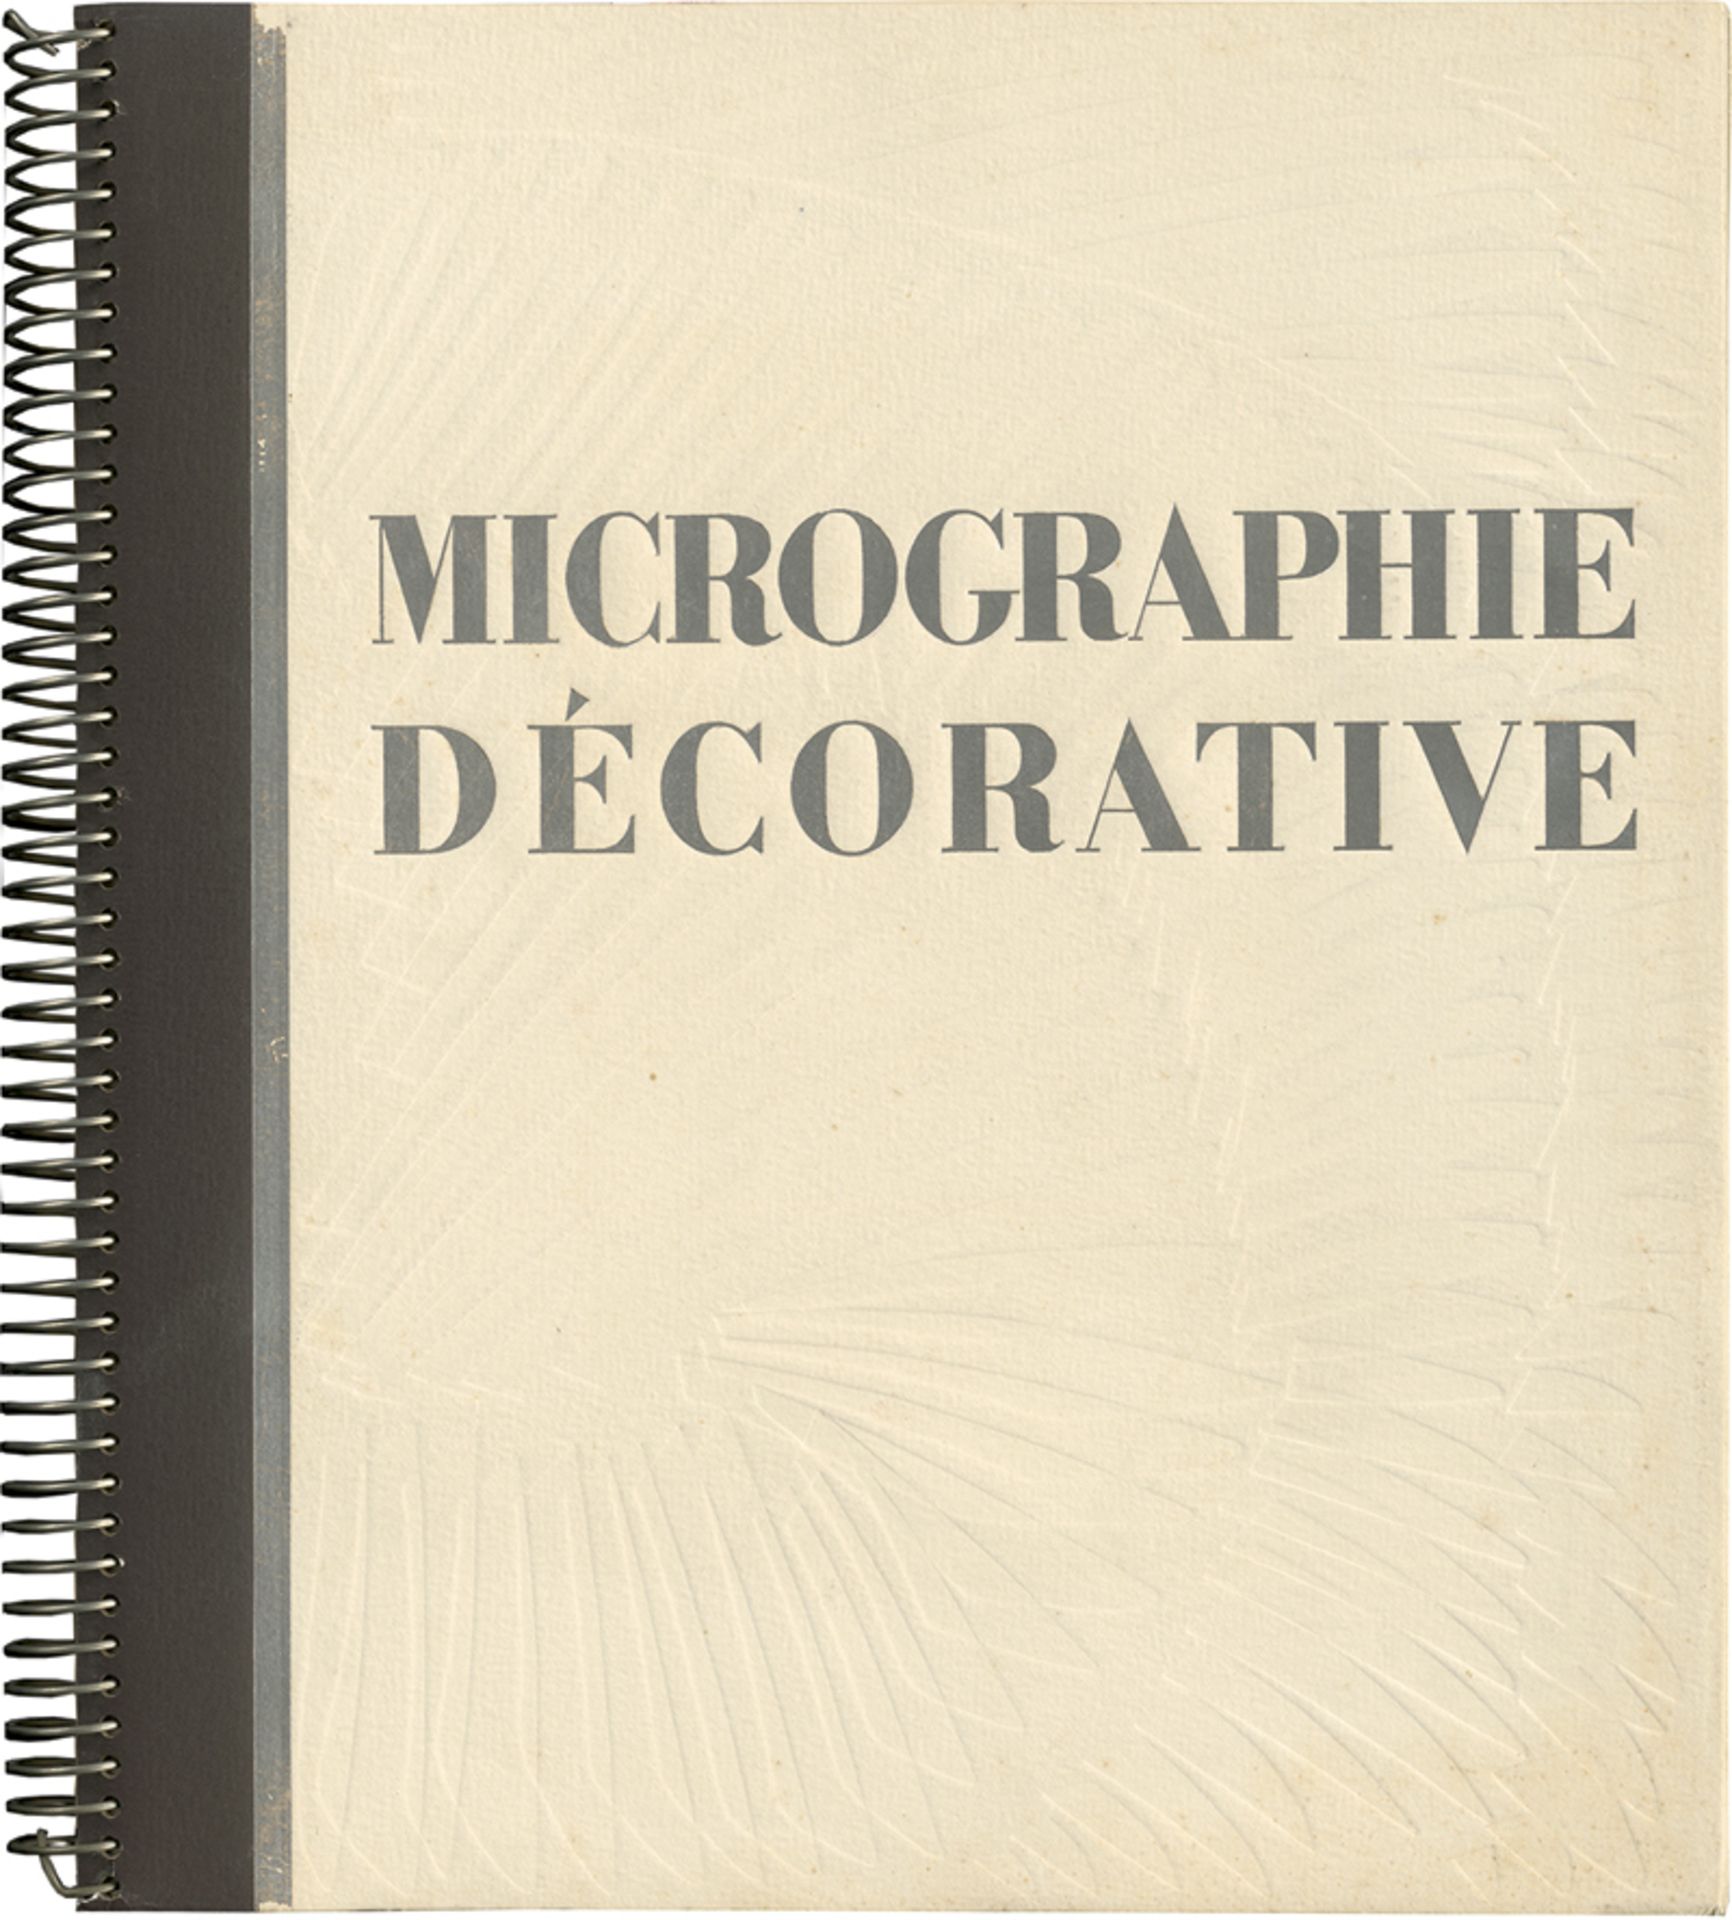 Albin-Guillot, Laure: Micrographie décorative - Image 6 of 6